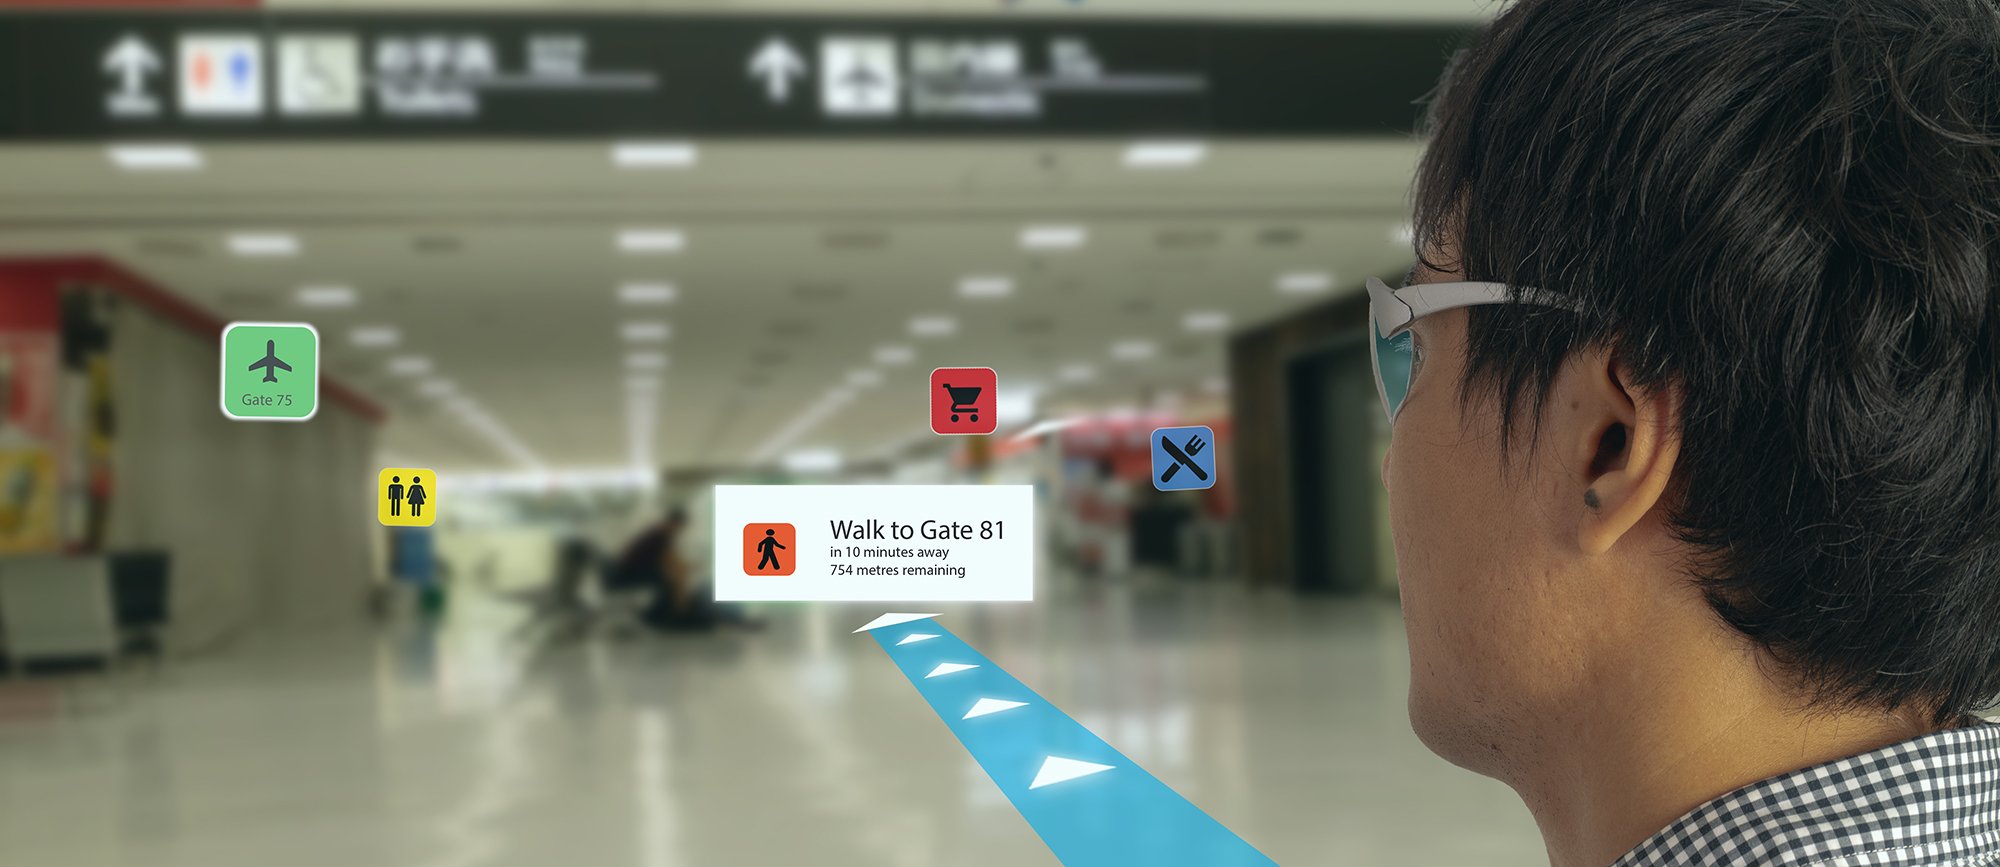 Indoor Navigation and Personalized Way Finding at Airports